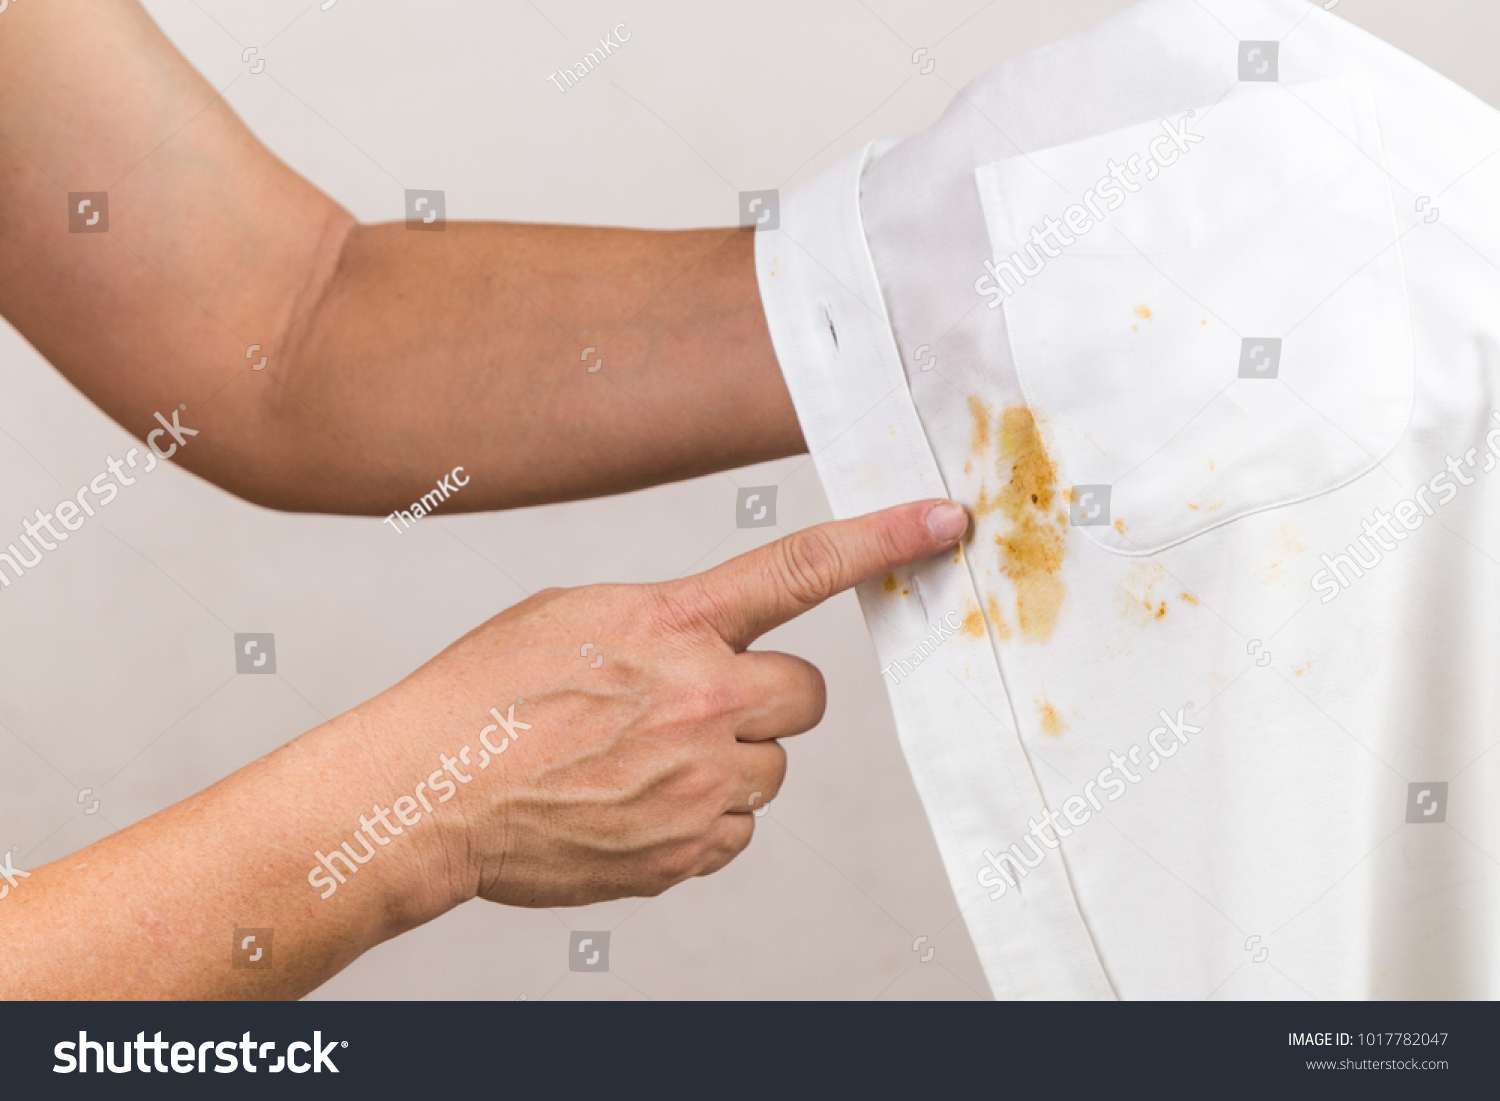 Frustrated person pointing to spilled curry stain on white shirt #1017782047